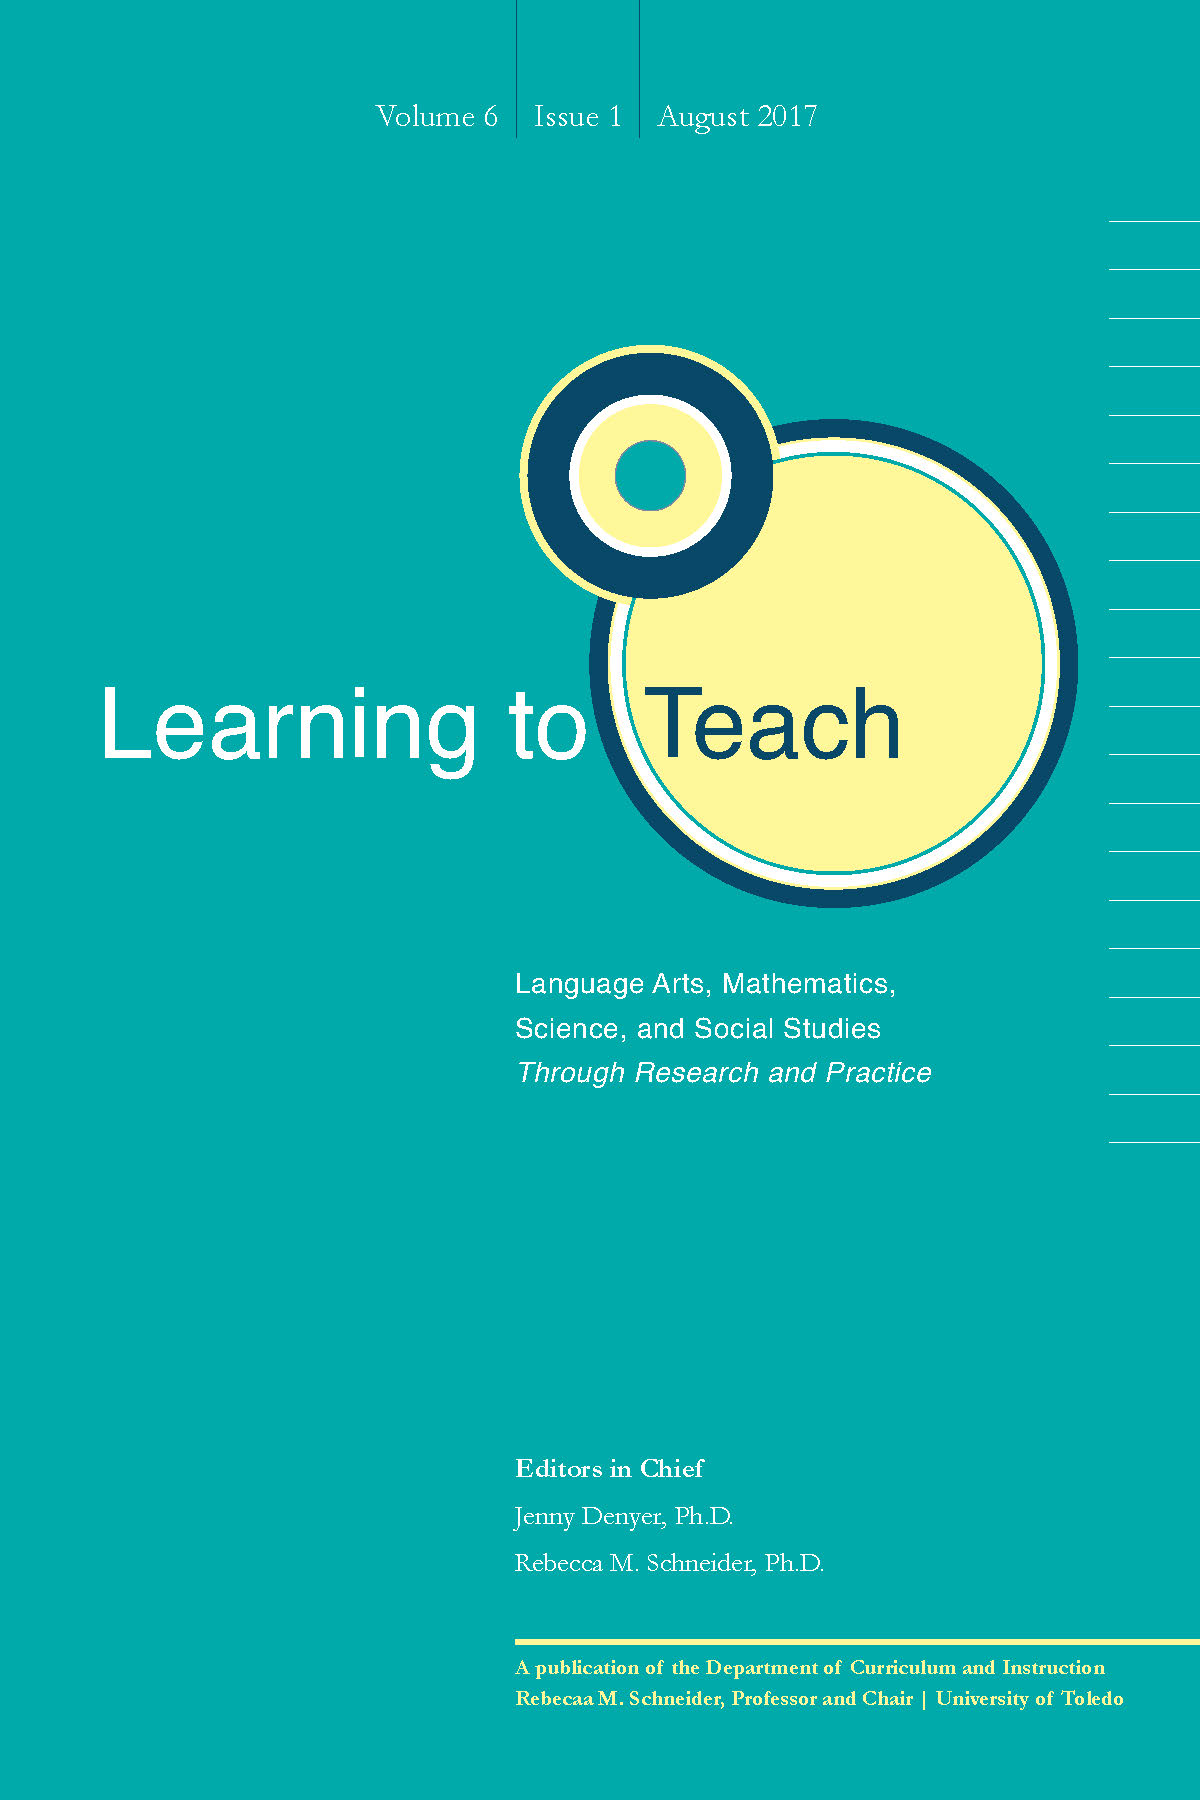 					View Vol. 6 No. 1 (2017): Learning to Teach Language Arts, Mathematics, Science, and Social Studies Through Research and Practice
				